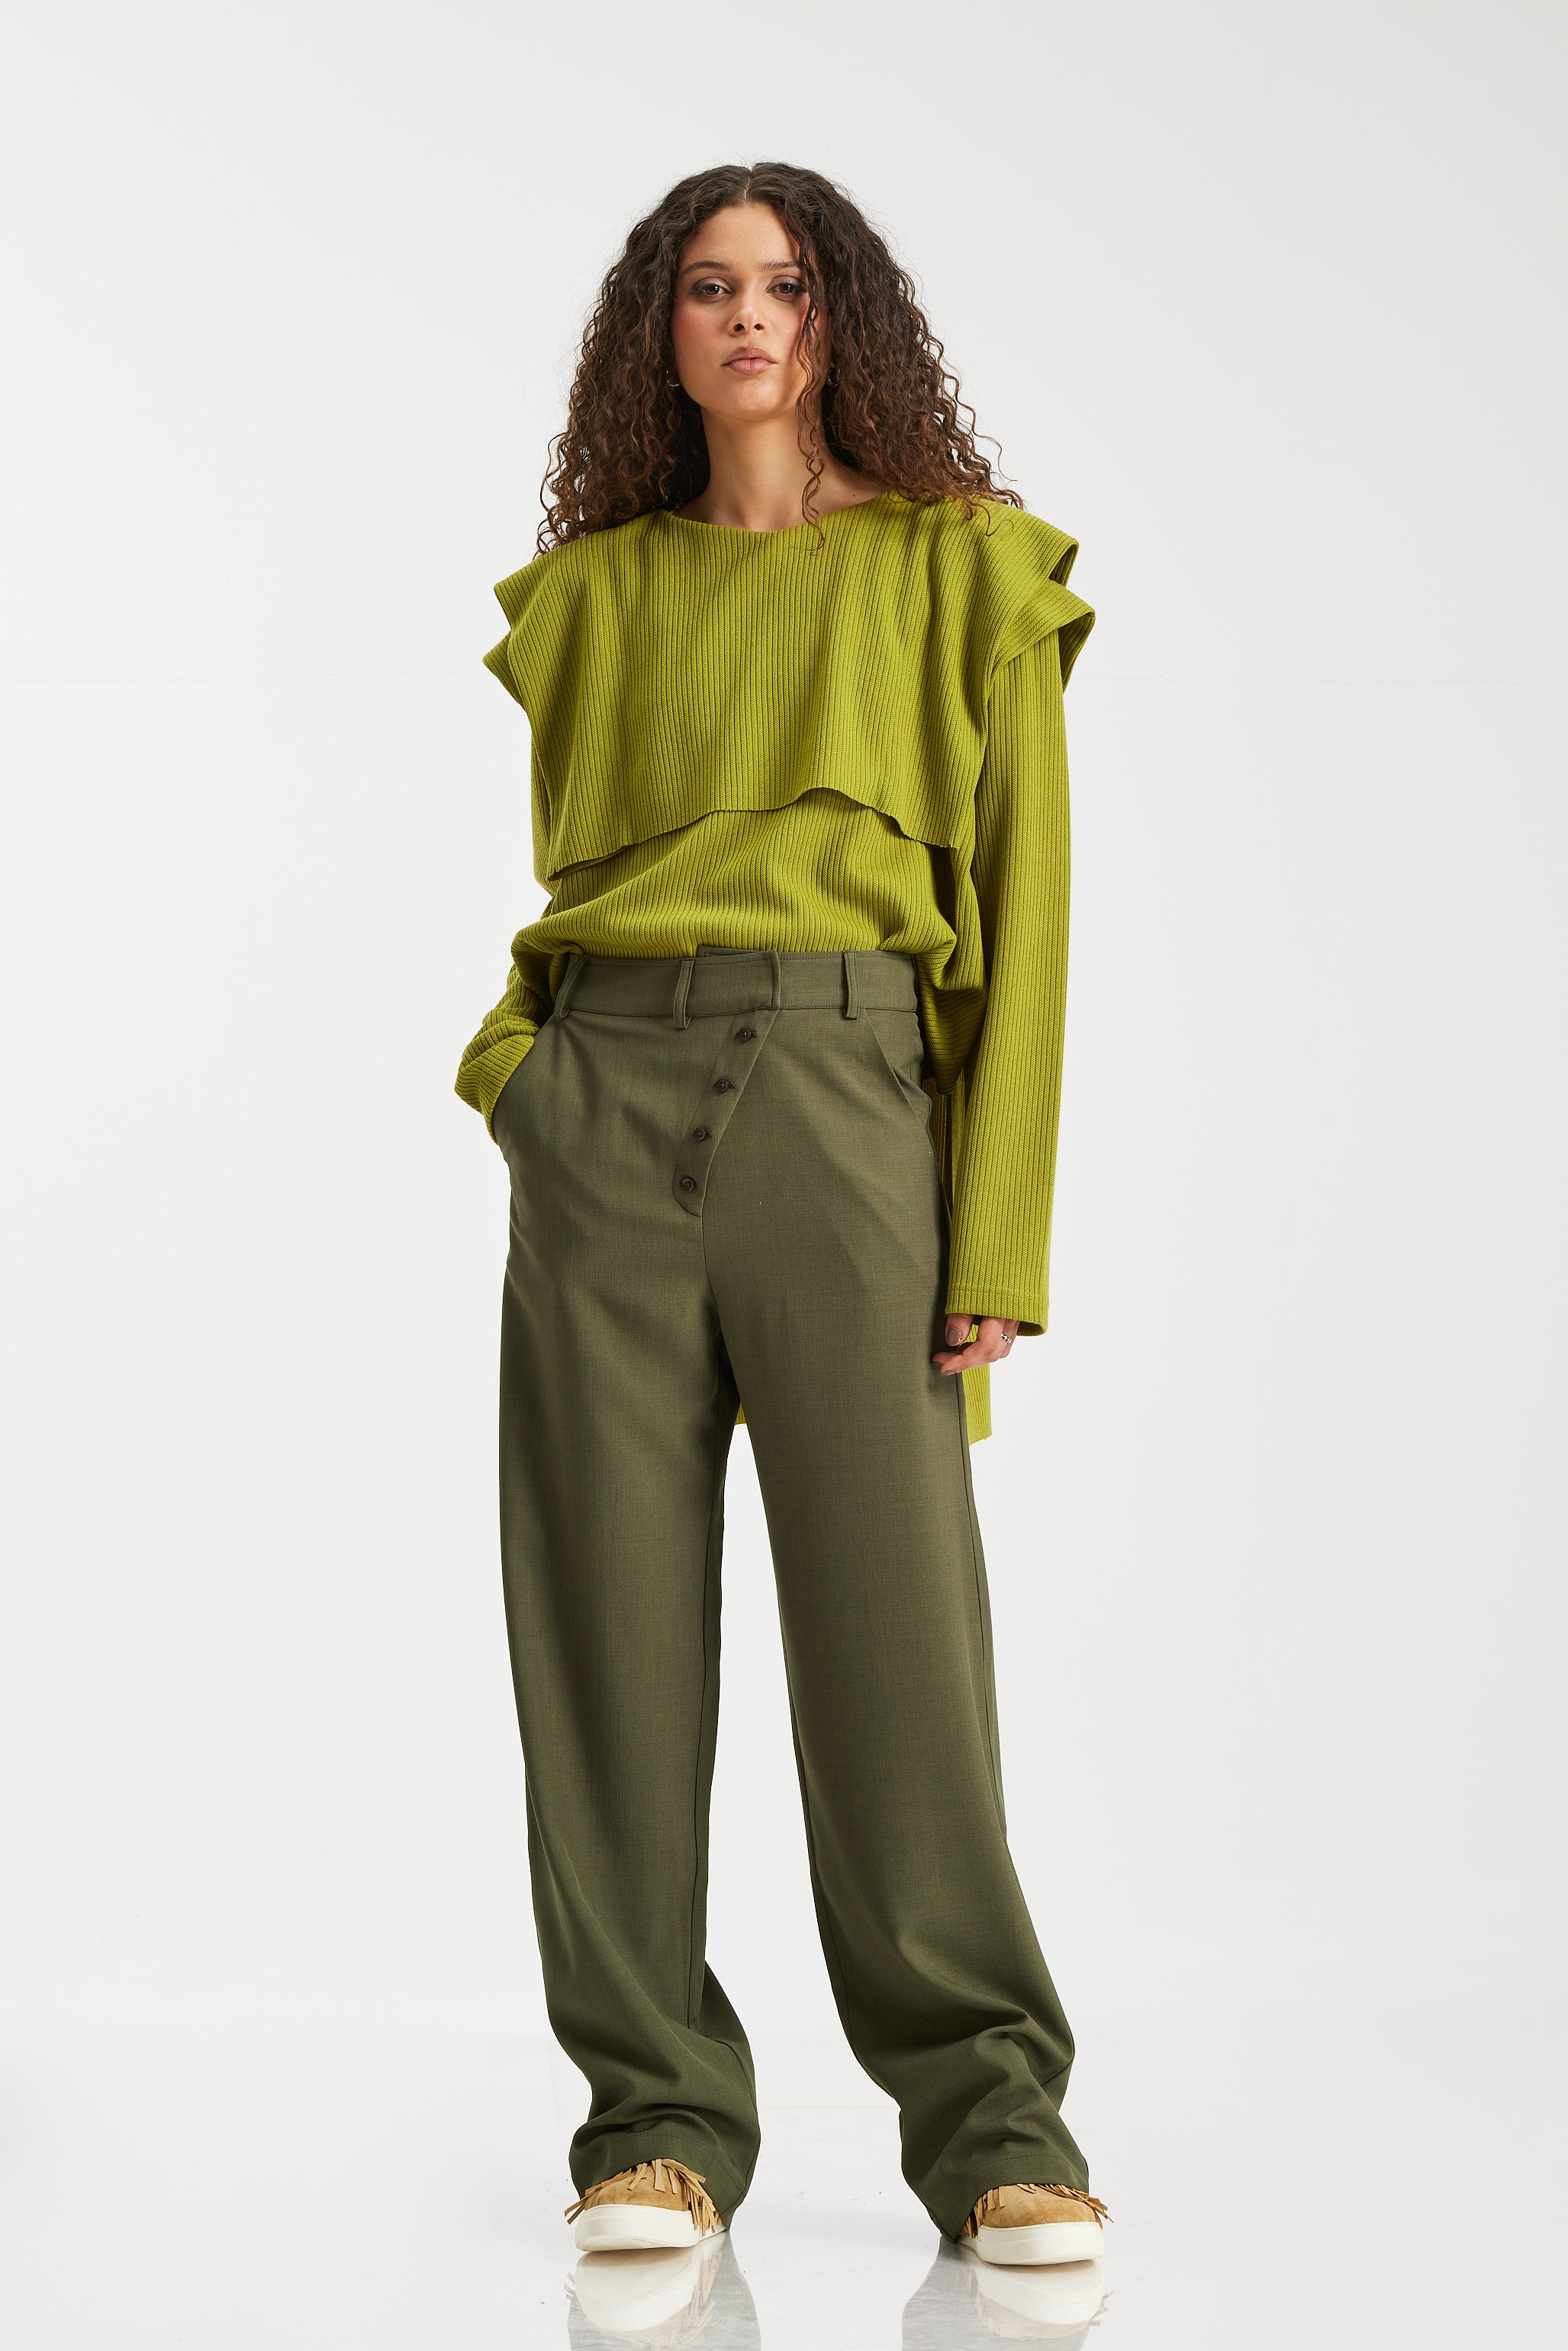 Ribbed double layer sweater in apple green